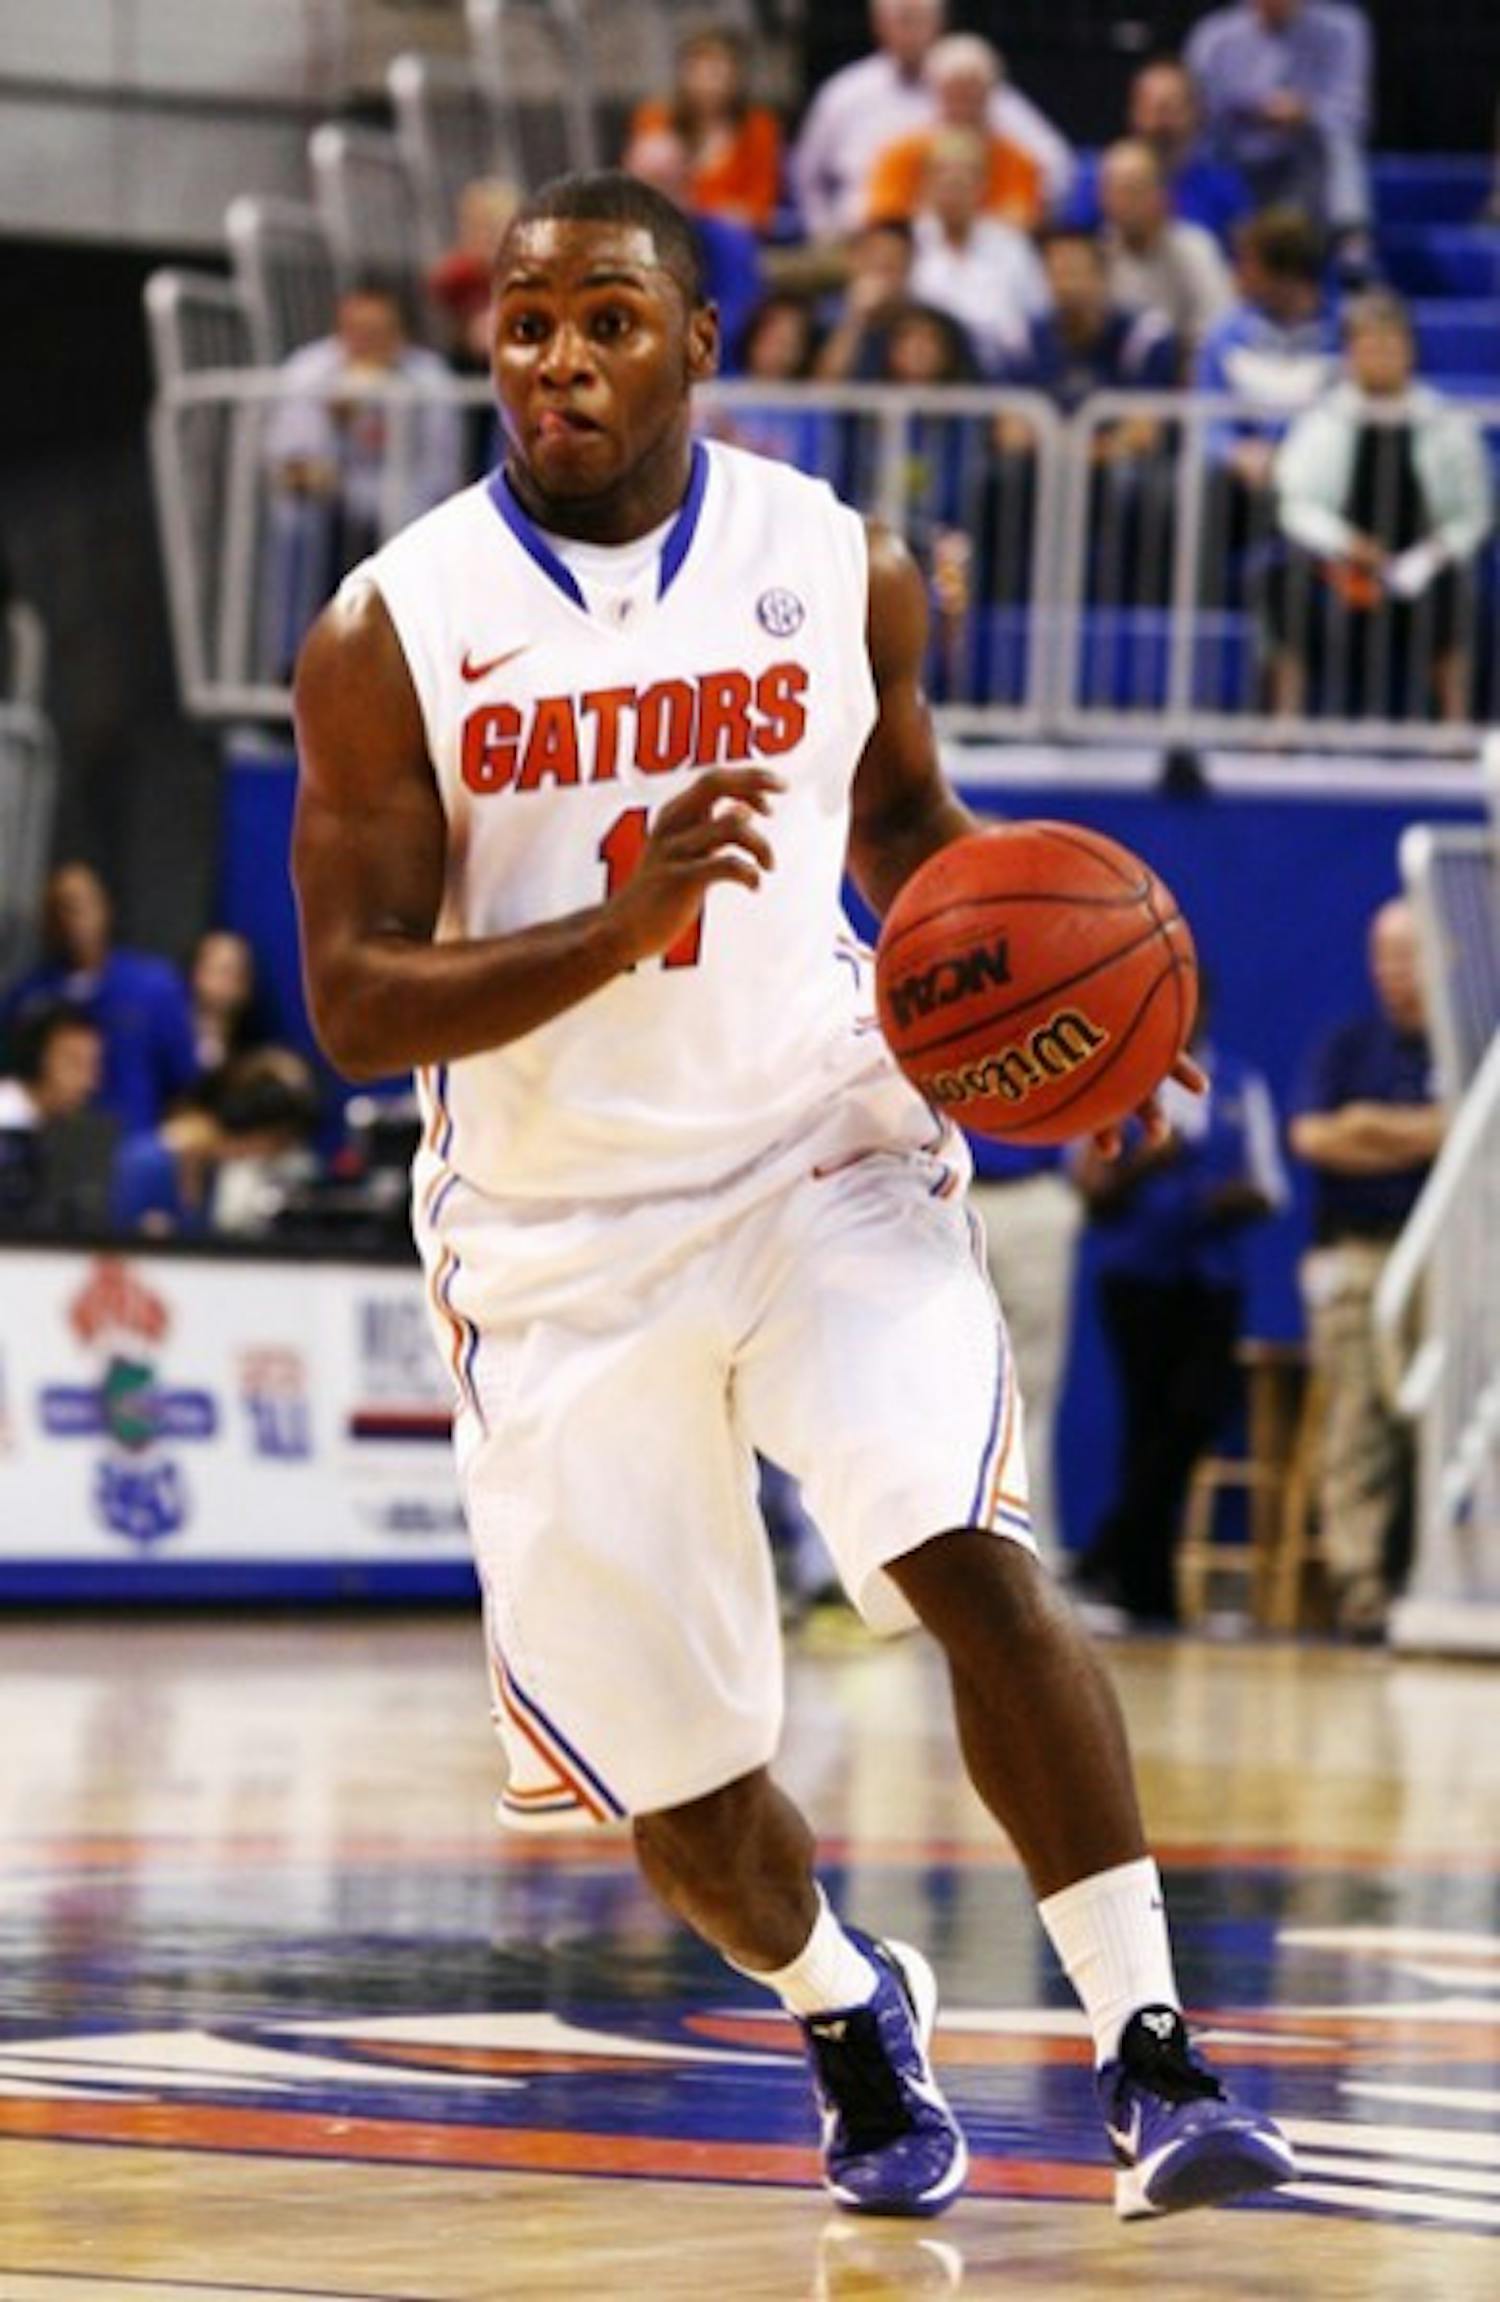 Florida point guard Erving Walker struggled with his shot against Wright State, finishing with nine points on 1-of-6 shooting from three.